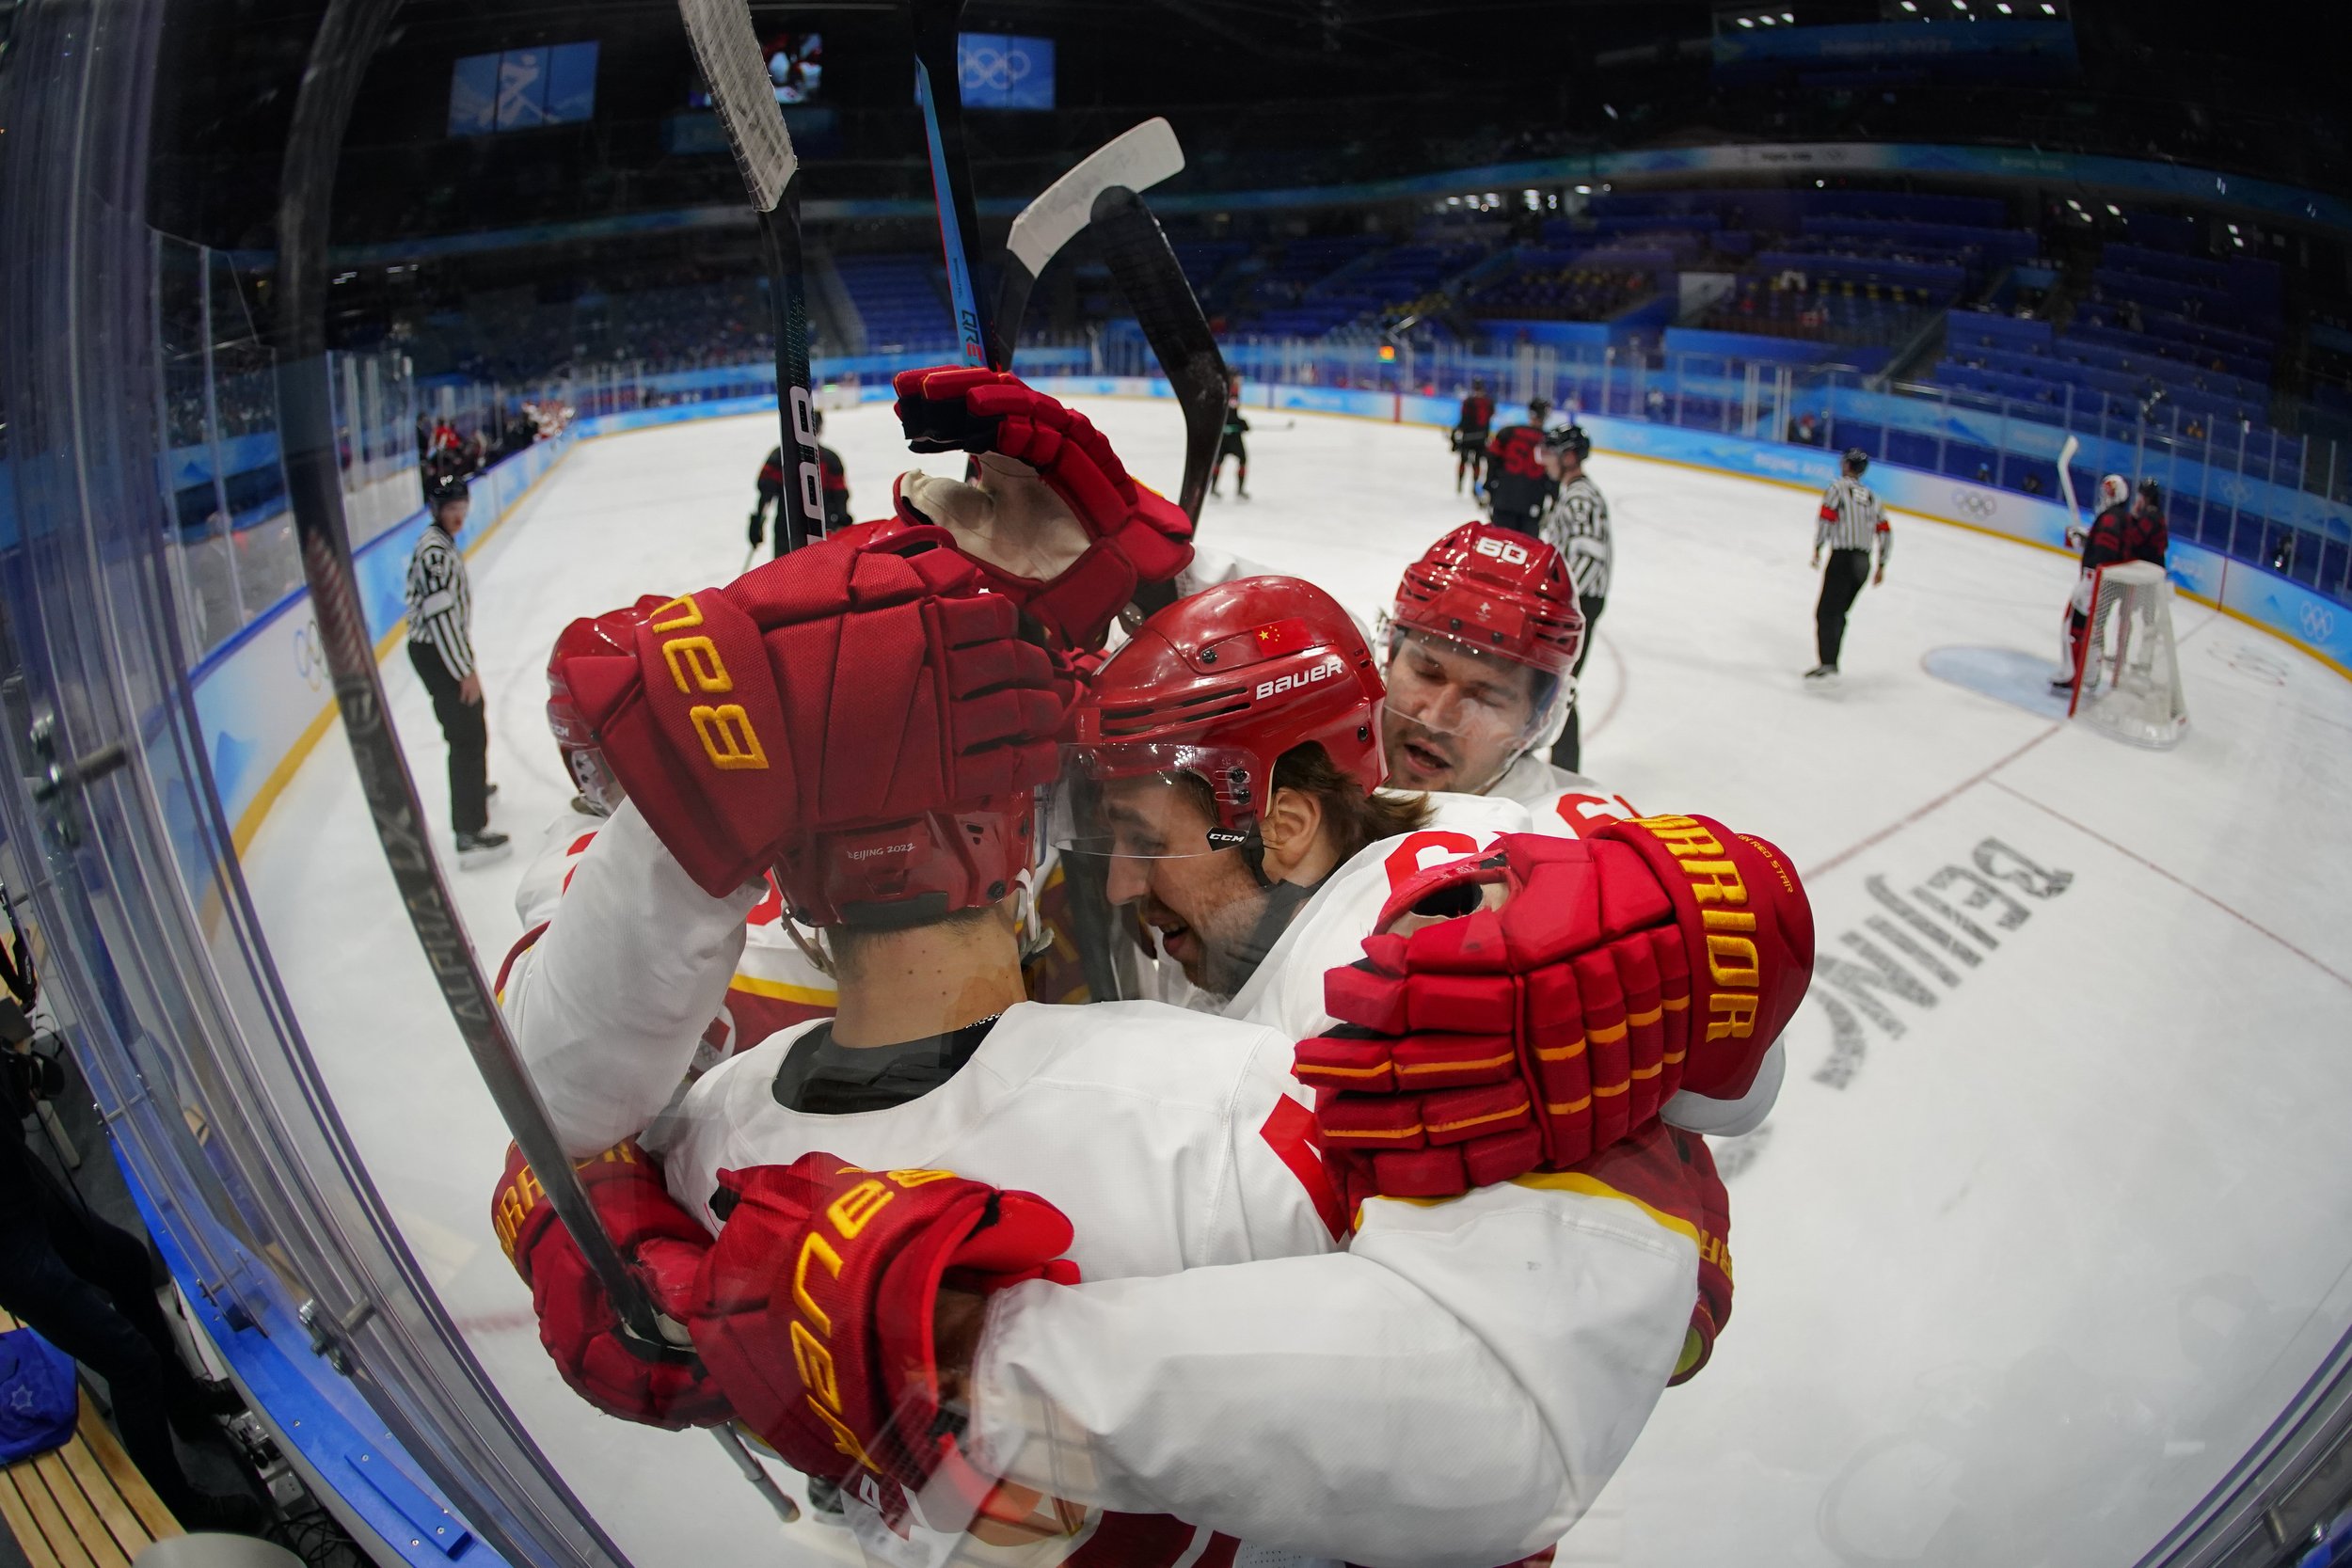  China's Jian An (Cory Kane), front left, is congratulated after scoring a goal against Canada during a men's qualification round hockey game at the 2022 Winter Olympics, Tuesday, Feb. 15, 2022, in Beijing. (AP Photo/Matt Slocum) 